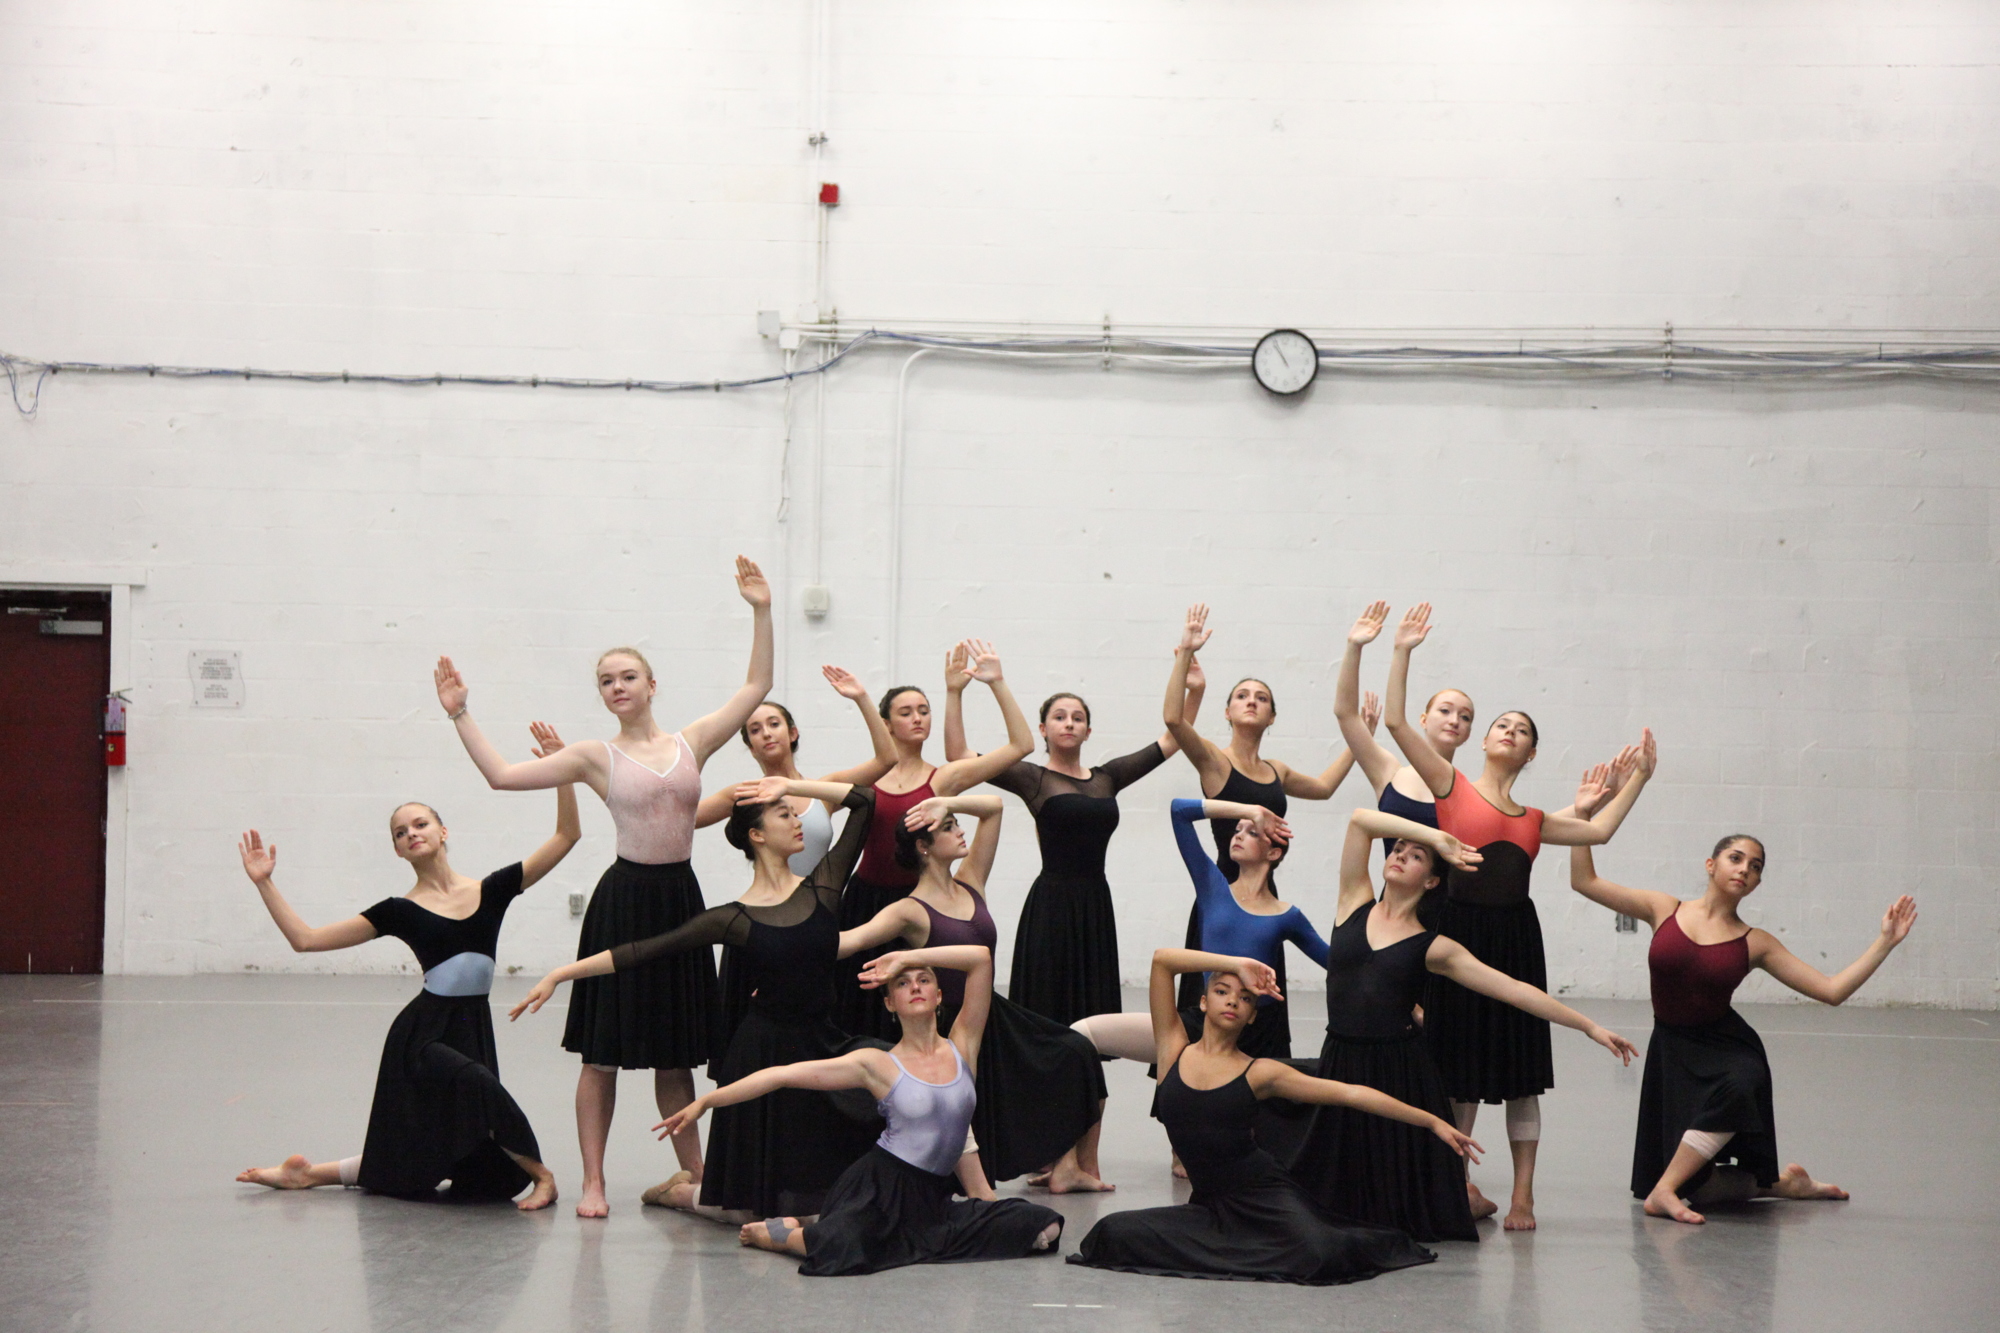 Nearly 70 students cane from all across the country and the world for this year's intensive. Photo by Frank Atura